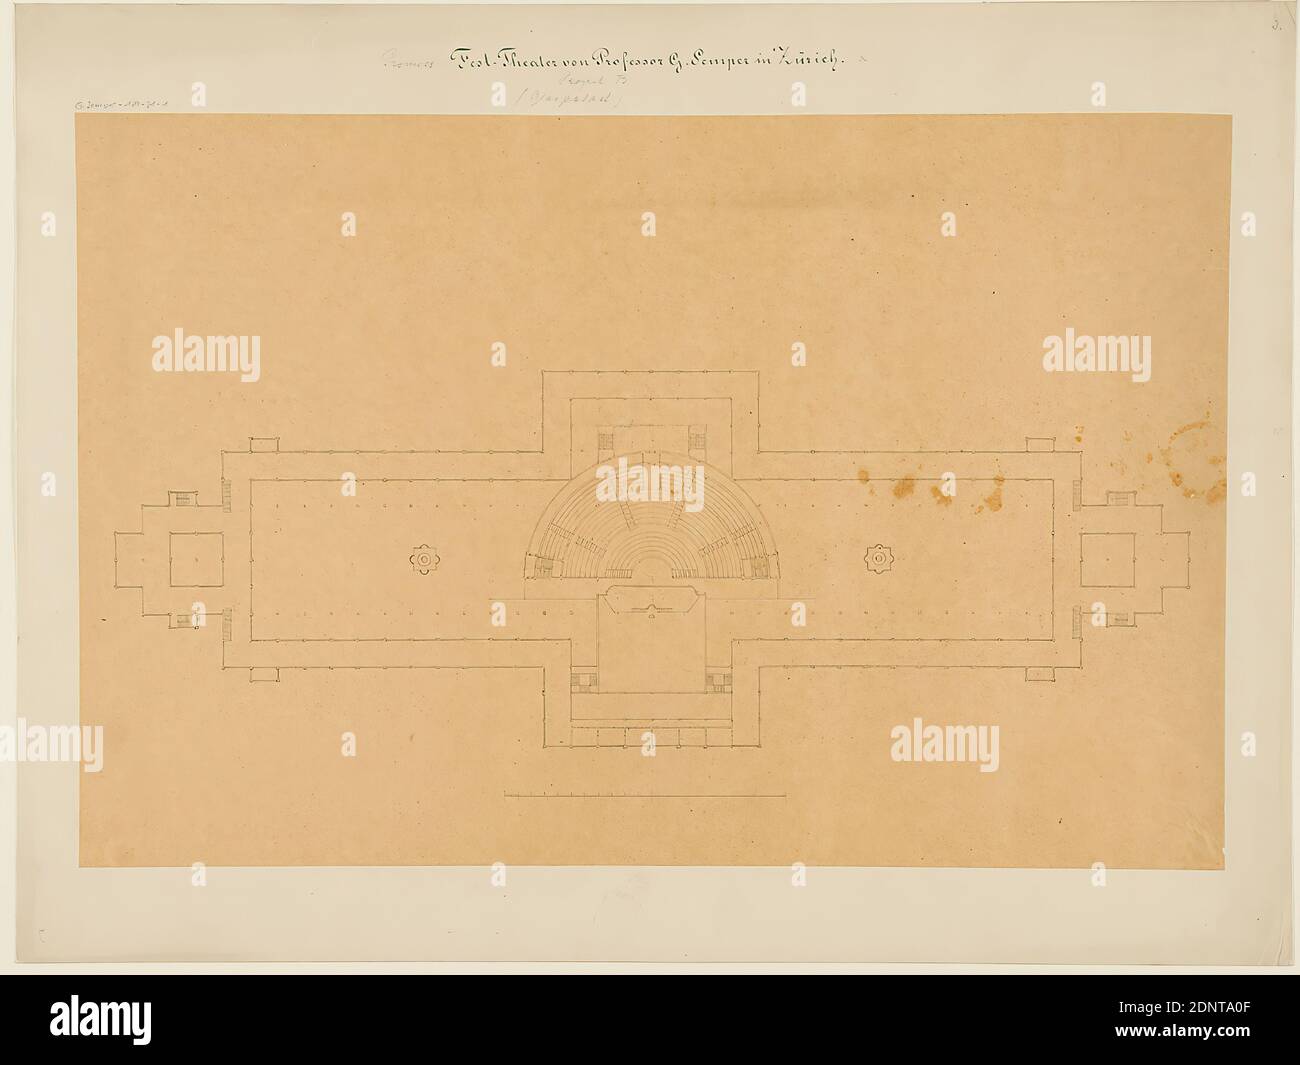 Gottfried Semper, design for the provisional Richard Wagner Festival Theater in the Glaspalast, Munich (Project B). Floor plan, tracing paper, drawing, sheet size: height: 37.8 cm; width: 57.5 cm, signed: recto: in lead: Gottfried Semper, inscribed: recto on the cardboard: in ink: Provisor. [added in lead] Festival Theater of Professor Gottfried Semper in Zurich, in lead: Project B, f. Glaspalast, G. Semper 179-21-1, 3, stamp: recto on the cardboard: draft drawings, design, plan of a building, opera house, architecture, architectural drawing or model Stock Photo